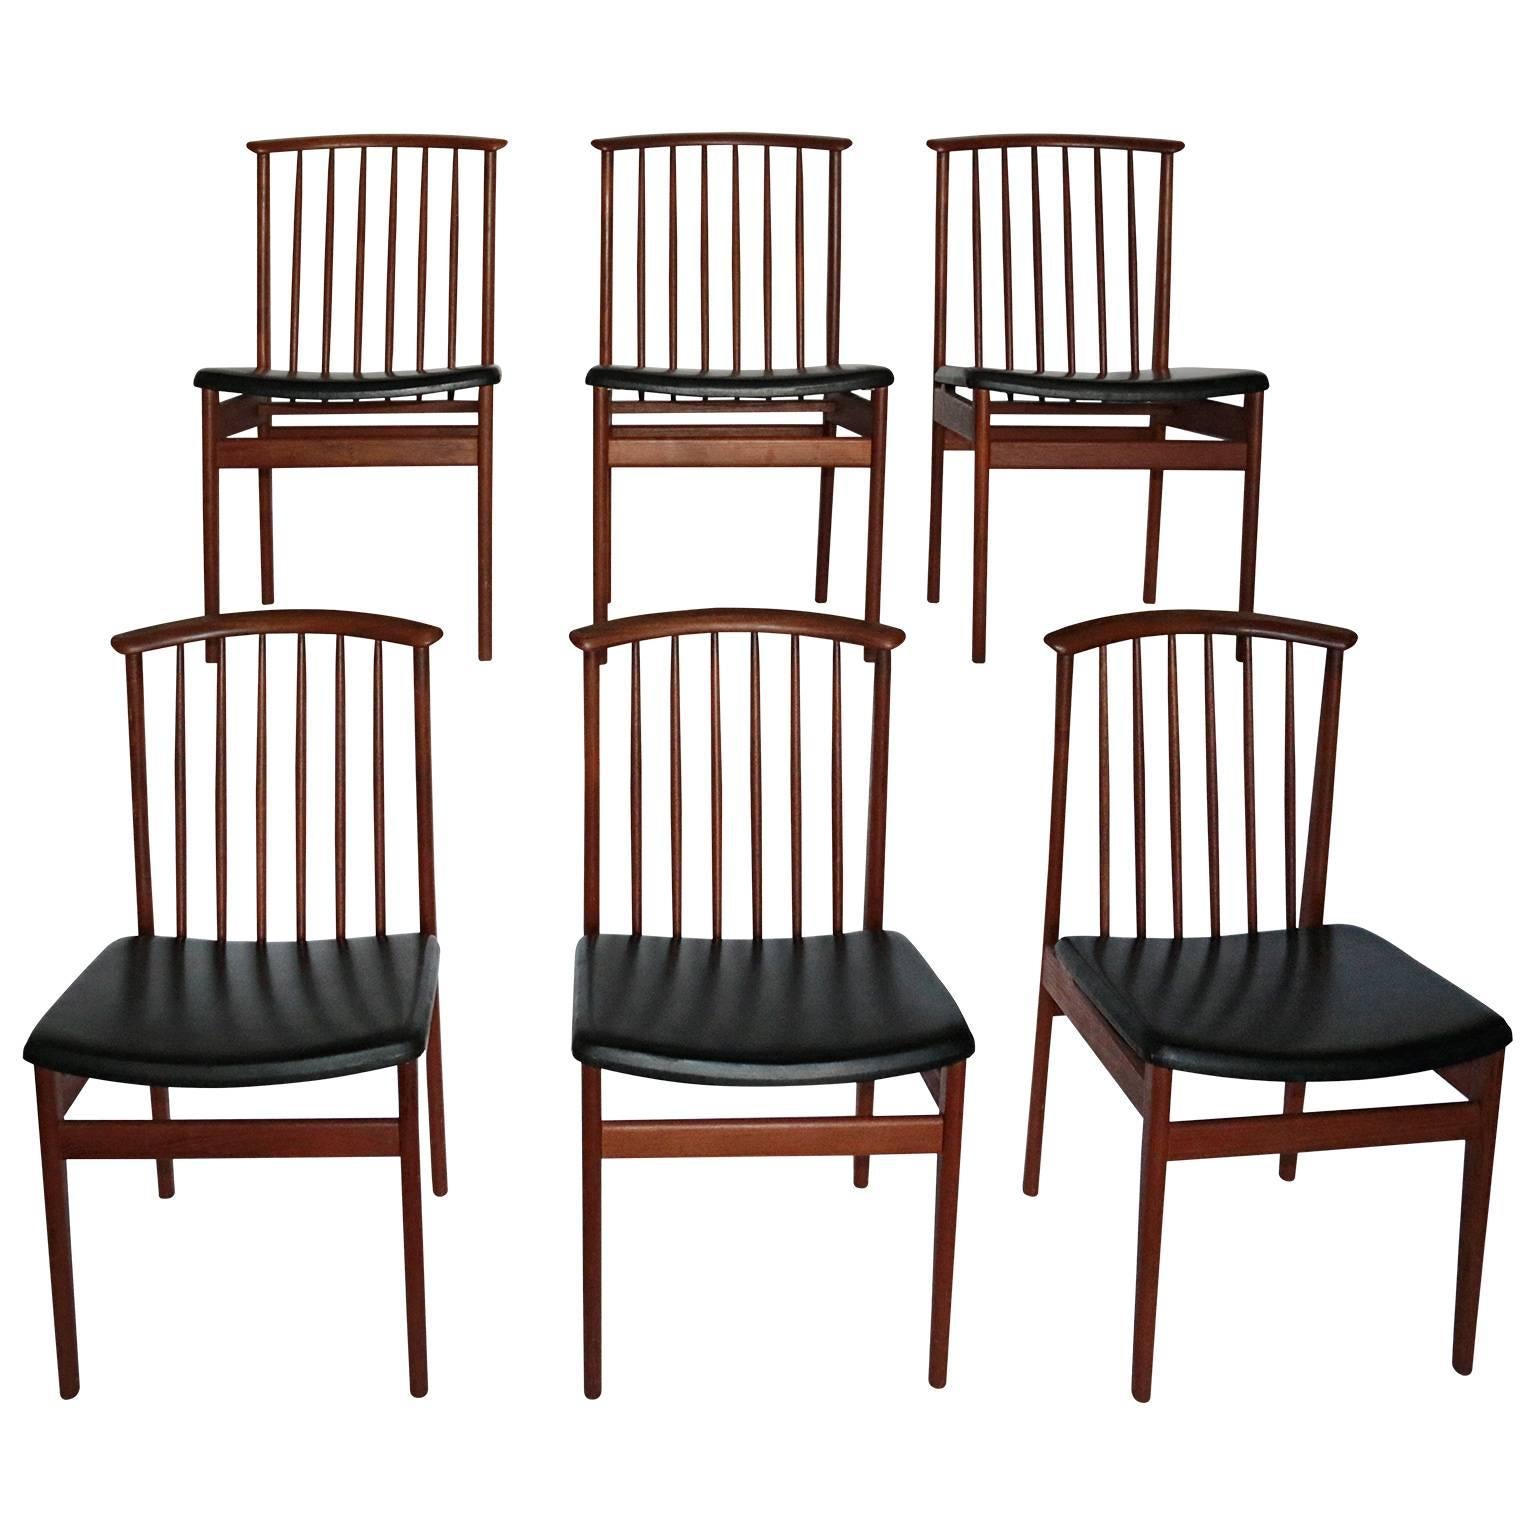 Set of six Mid-Century Modern dining chairs by DUX. Designed by Sylve Stenquist for DUX. Teak wood.
DUX is been recognized for one of the most recognized Scandinavian Modern design.



       